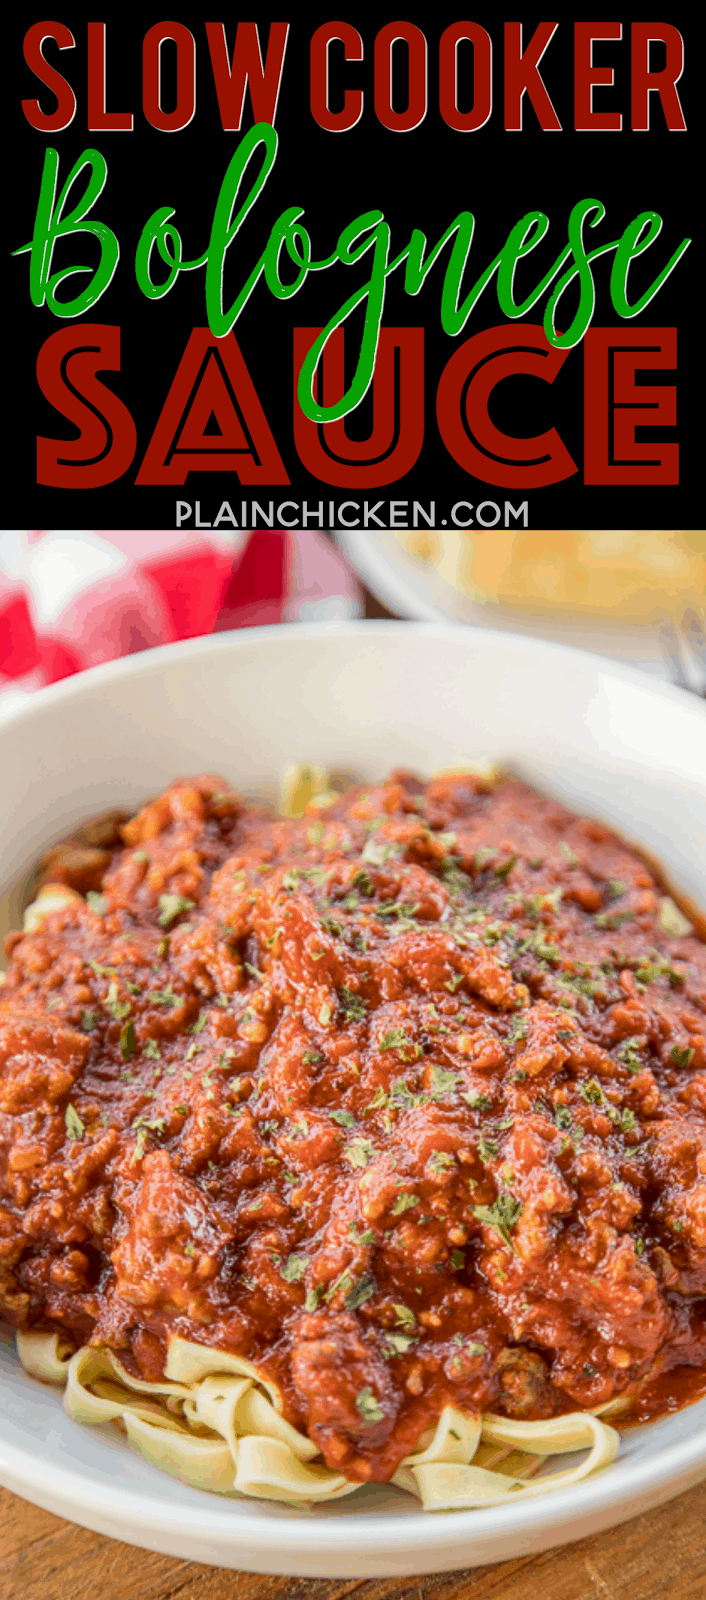 THE BEST Slow Cooker Bolognese Sauce - Italian sausage, garlic crushed tomatoes, tomato paste, and spices cook all day in the crock-pot. Hands-down THE BEST spaghetti sauce EVER! Everyone raves about this sauce. We make this all the time. Freeze leftovers for a quick meal later!